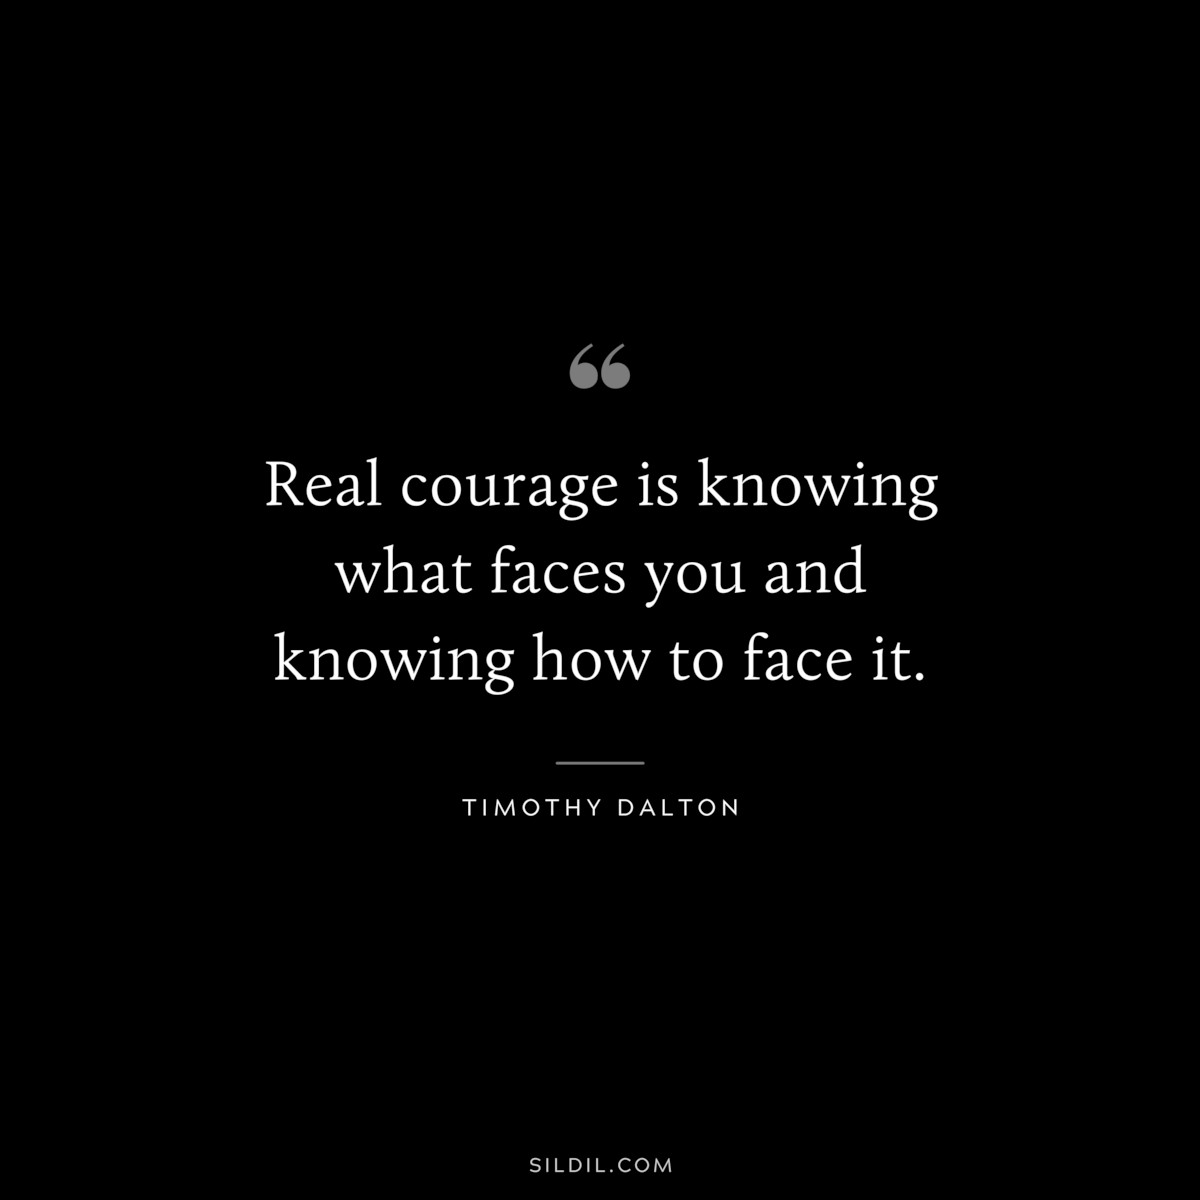 Real courage is knowing what faces you and knowing how to face it. ― Timothy Dalton